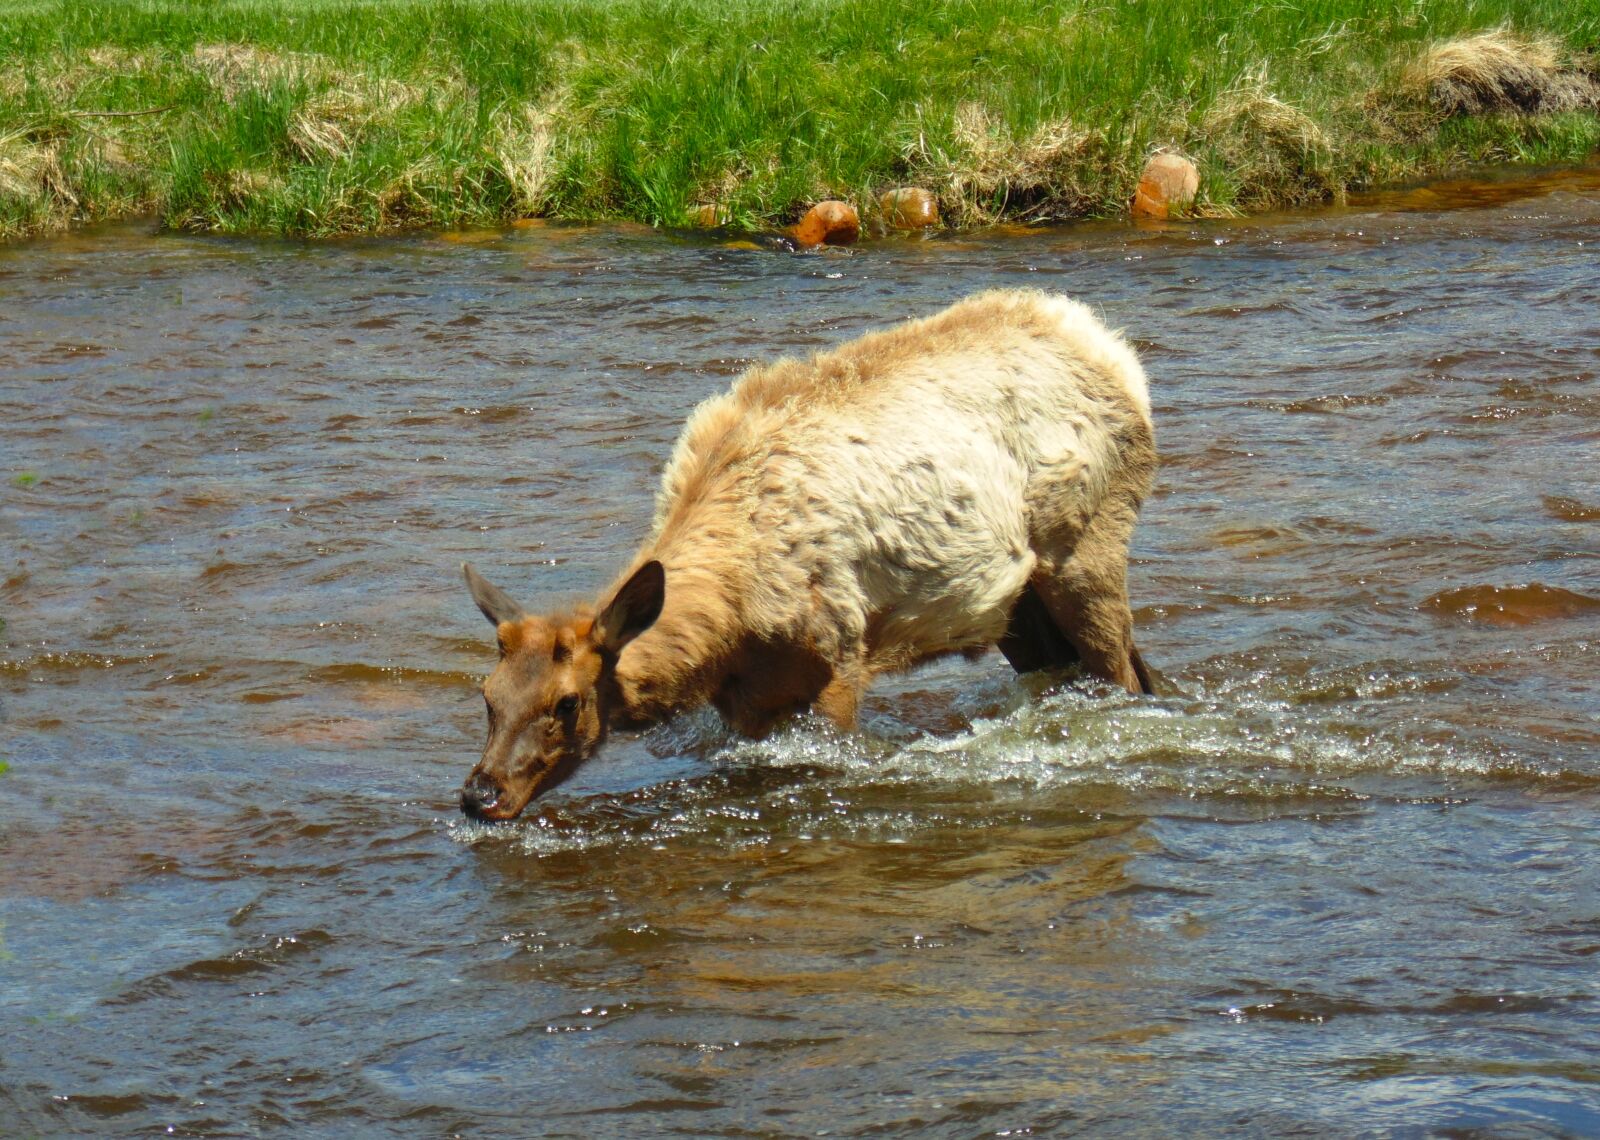 Sony Cyber-shot DSC-H200 sample photo. Yearling elk in river photography